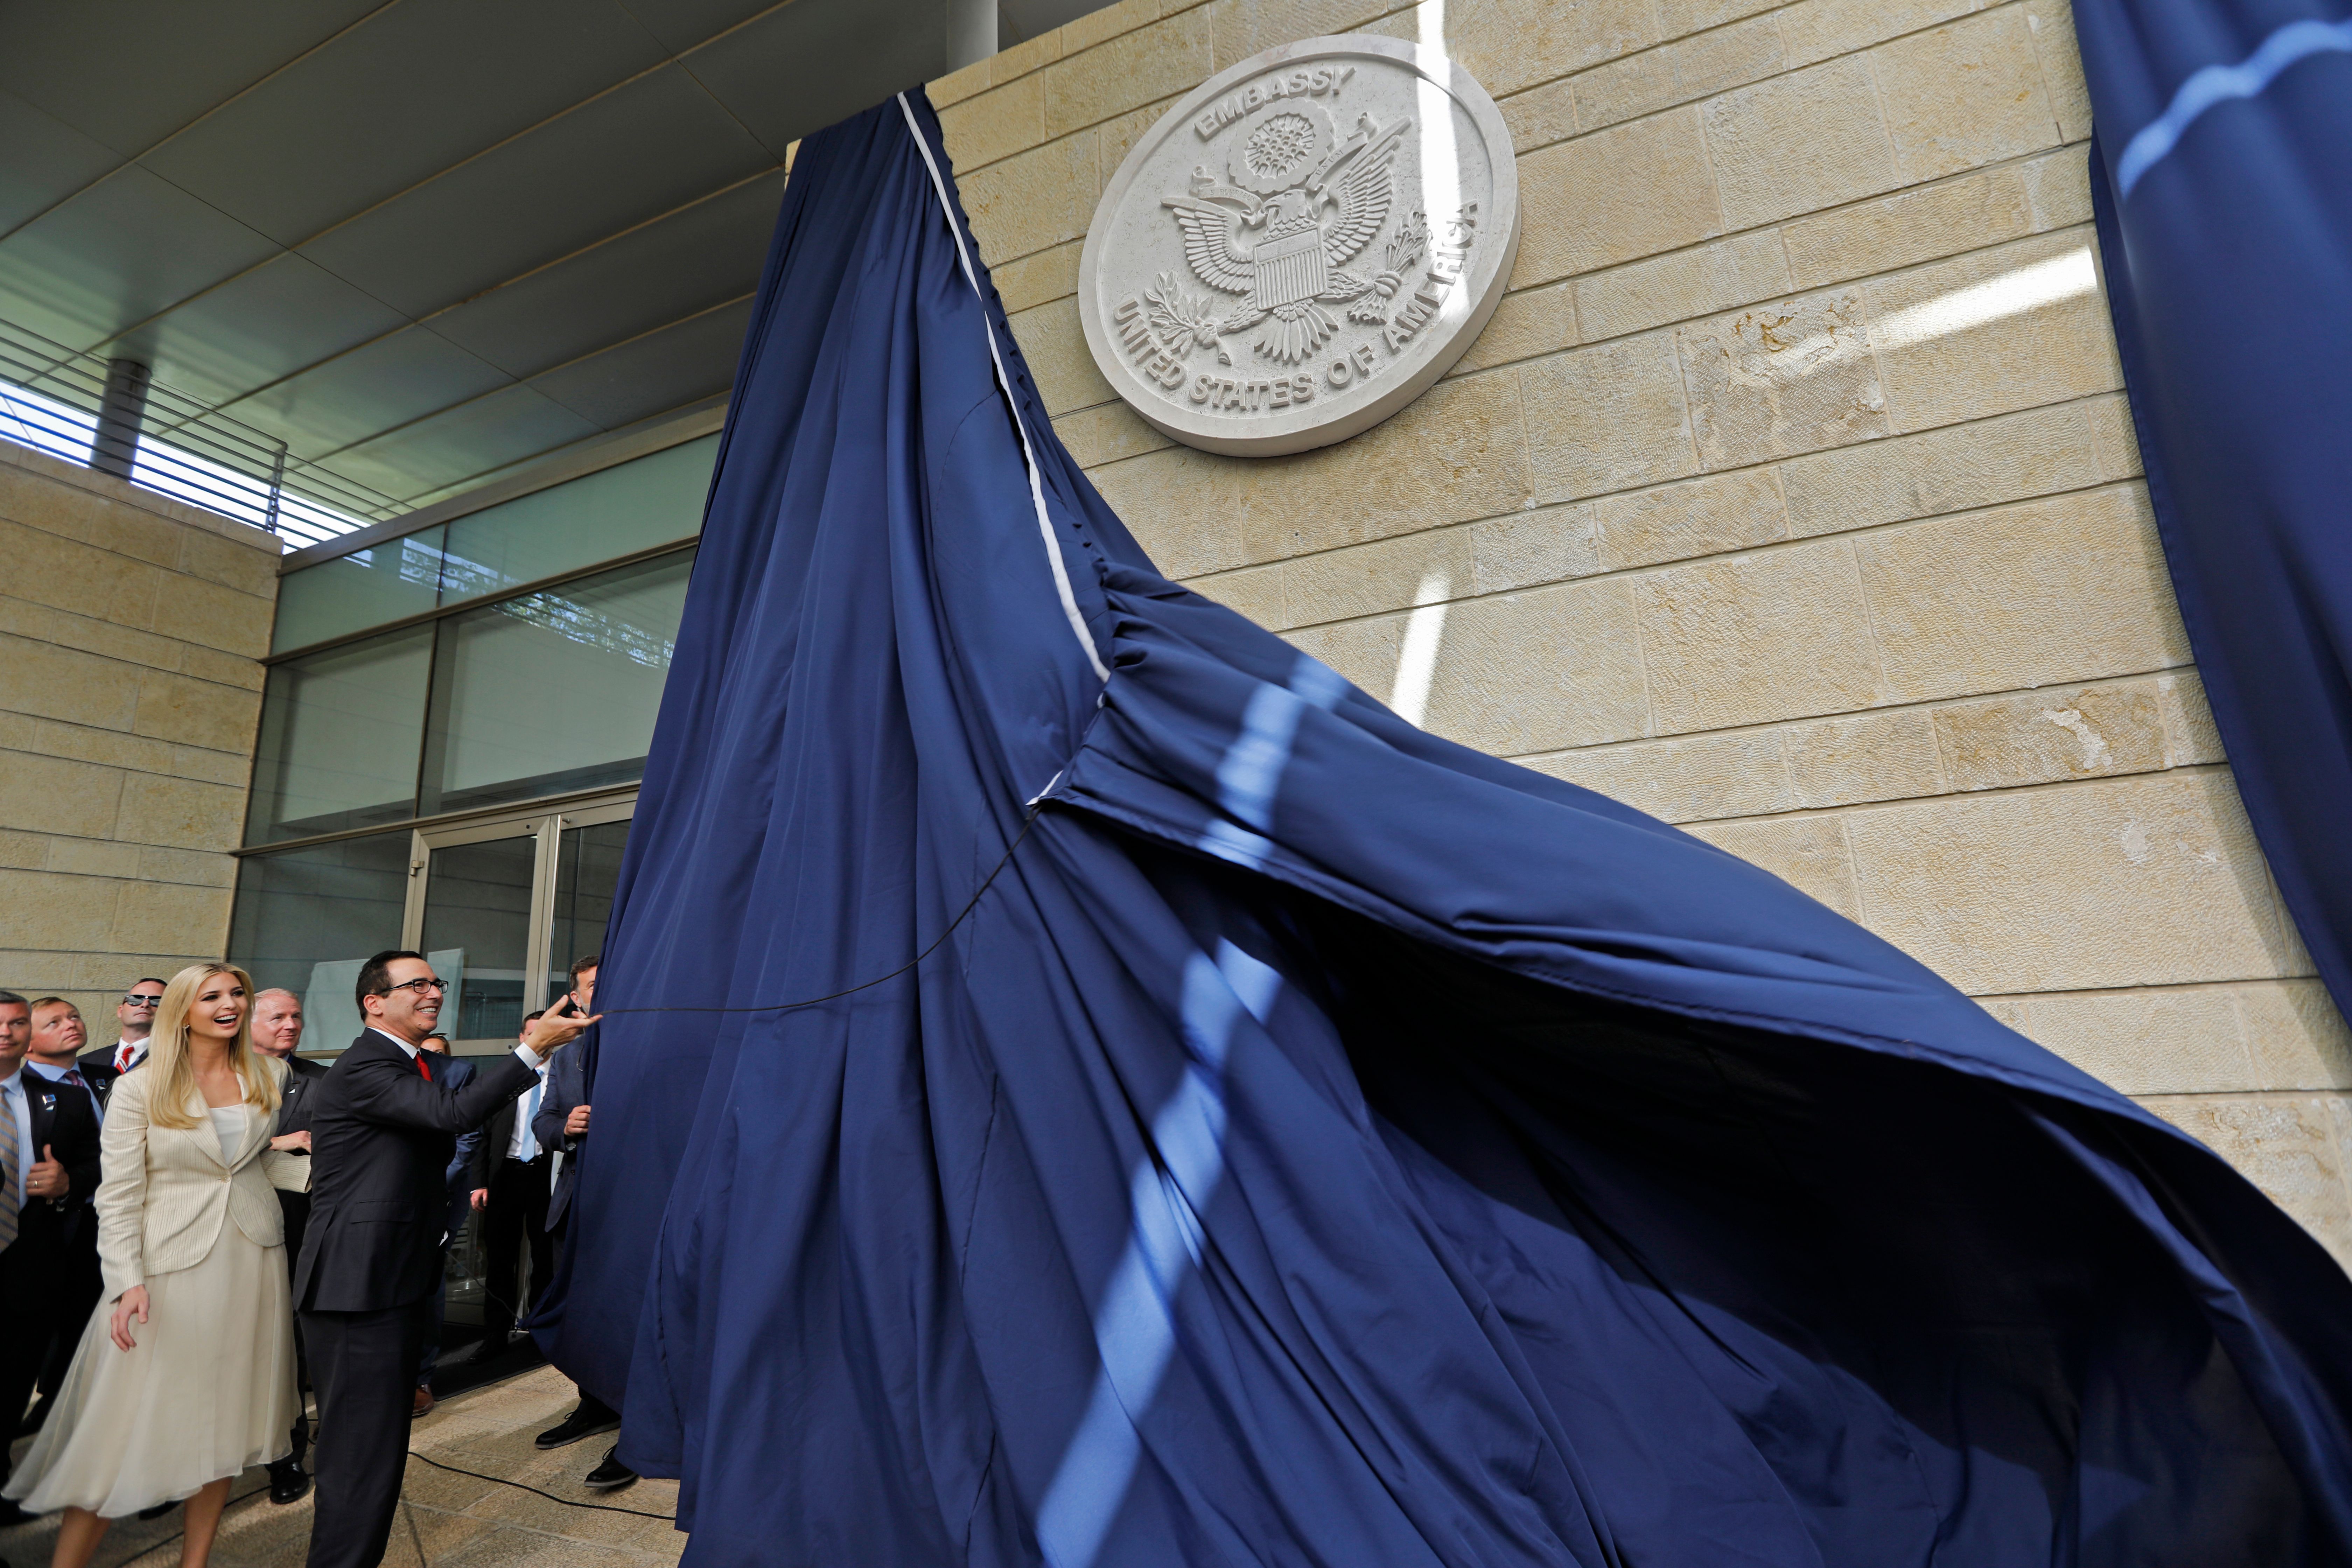 US Treasury Secretary Steve Mnuchin and US President's daughter Ivanka Trump unveil an inauguration plaque during the opening of the US embassy in Jerusalem on May 14, 2018. - The United States moved its embassy in Israel to Jerusalem after months of global outcry, Palestinian anger and exuberant praise from Israelis over President Donald Trump's decision tossing aside decades of precedent. (Photo by Menahem KAHANA / AFP) (Photo credit should read MENAHEM KAHANA/AFP/Getty Images)